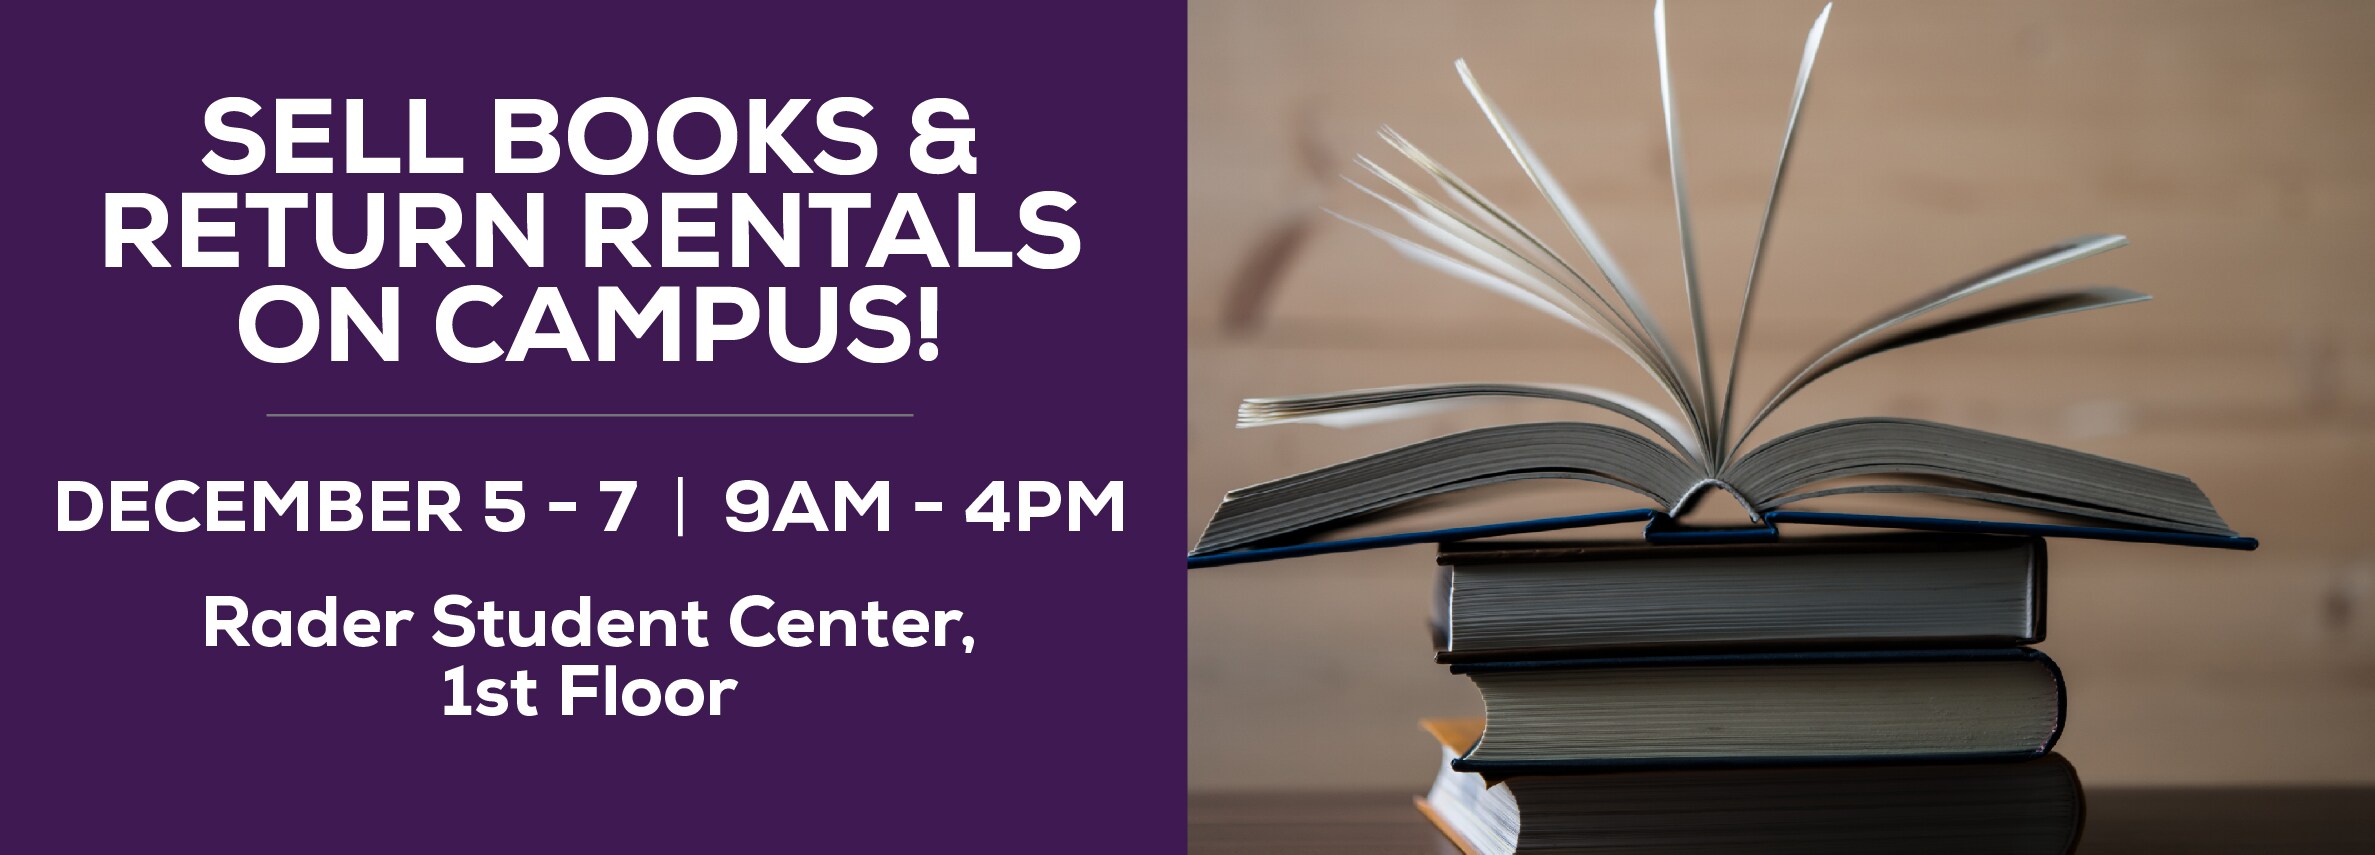 Sell books and return rentals on campus! December 5 - 7. 9am to 4pm. Rader Student Center, 1st Floor.